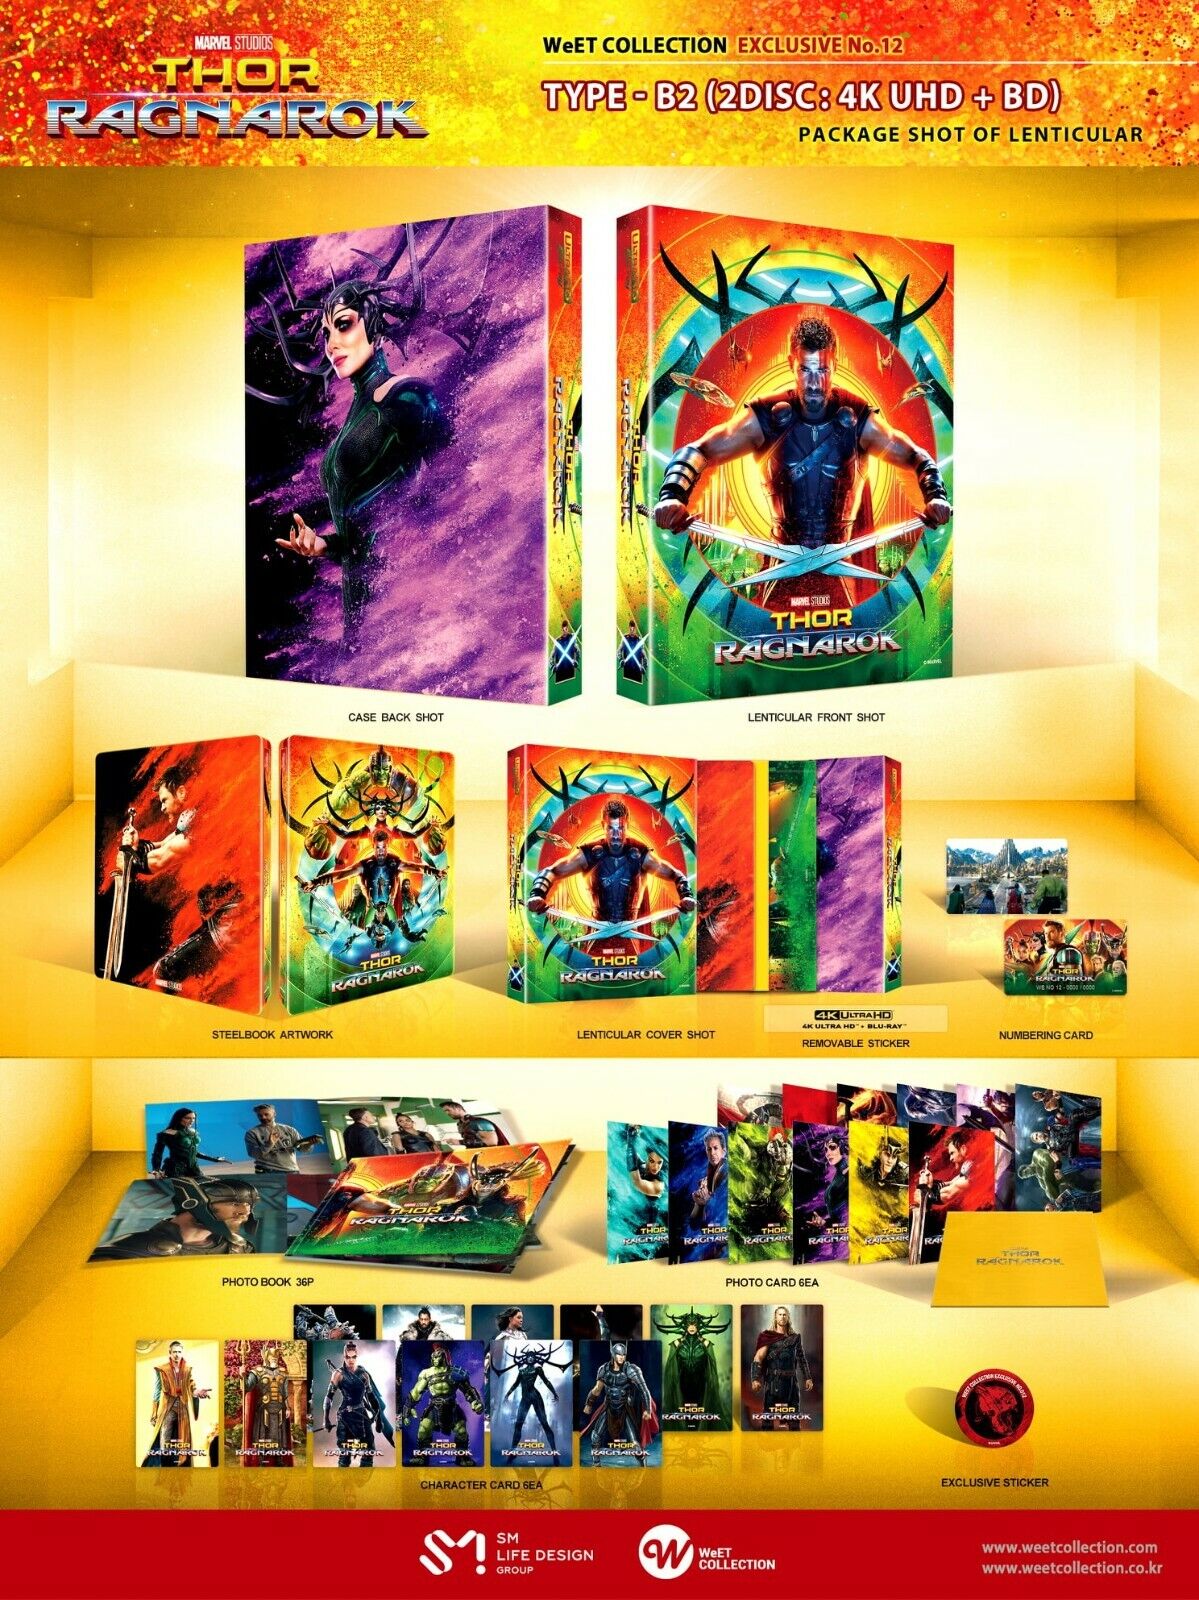 Thor: Ragnarok 4K+3D+2D Blu-ray Steelbook WeET Collection Exclusive #12 One Click Box Set